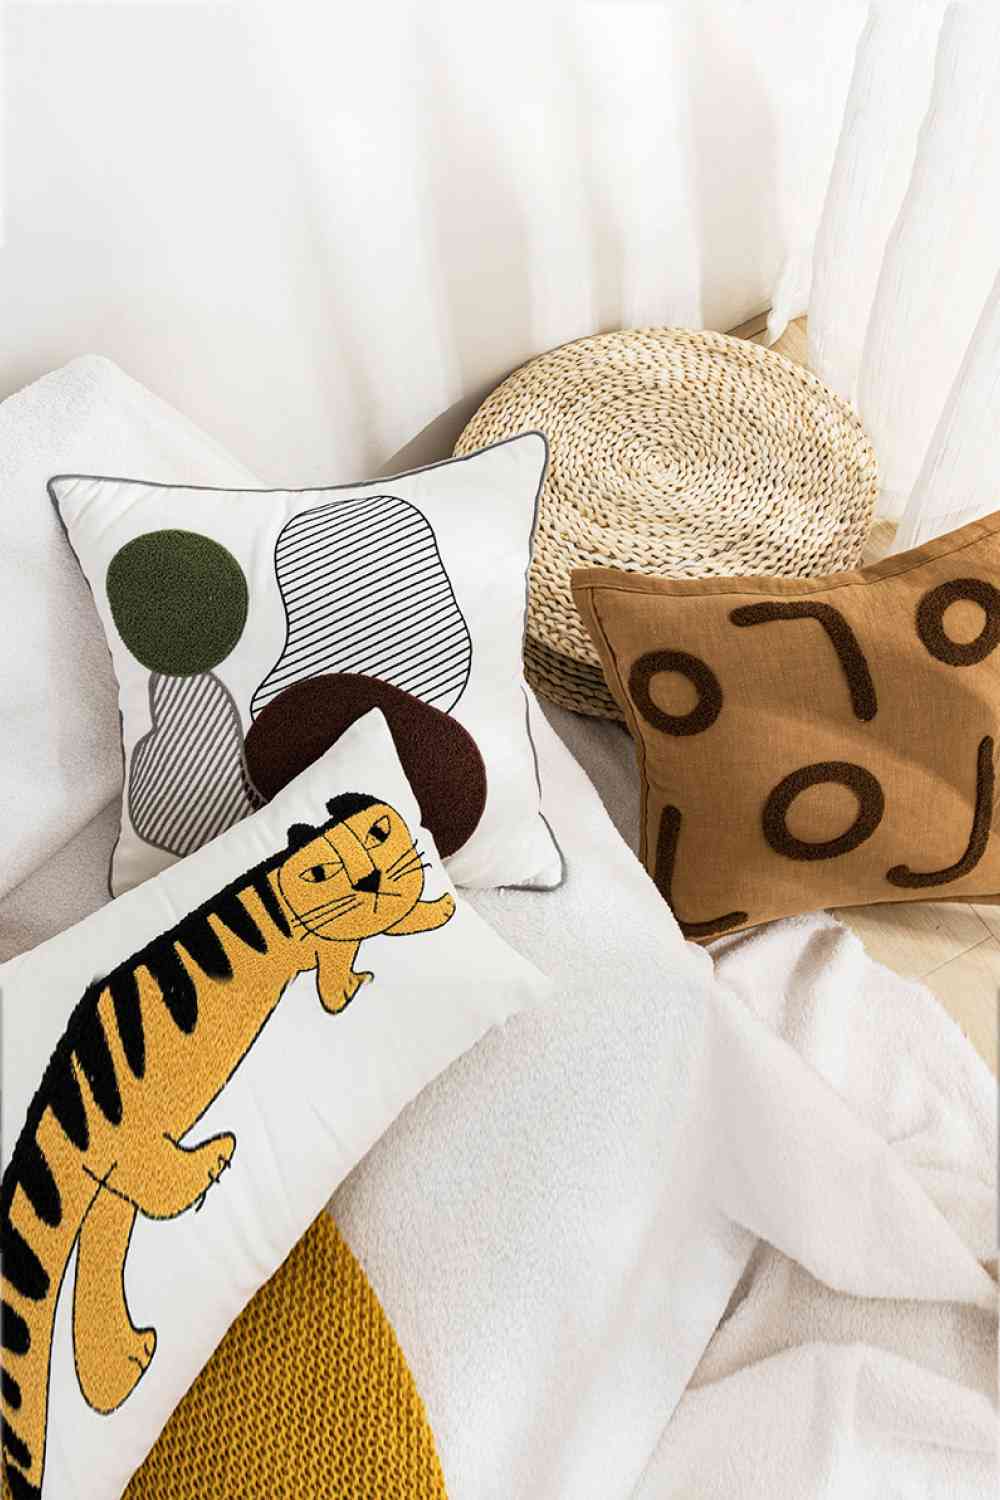 3-Pack Punch-Needle Embroidery Decorative Throw Pillow Cases - Decorative Pillowcases - Tophatter's Smashing Daily Deals | We're Against Forced Labor in China